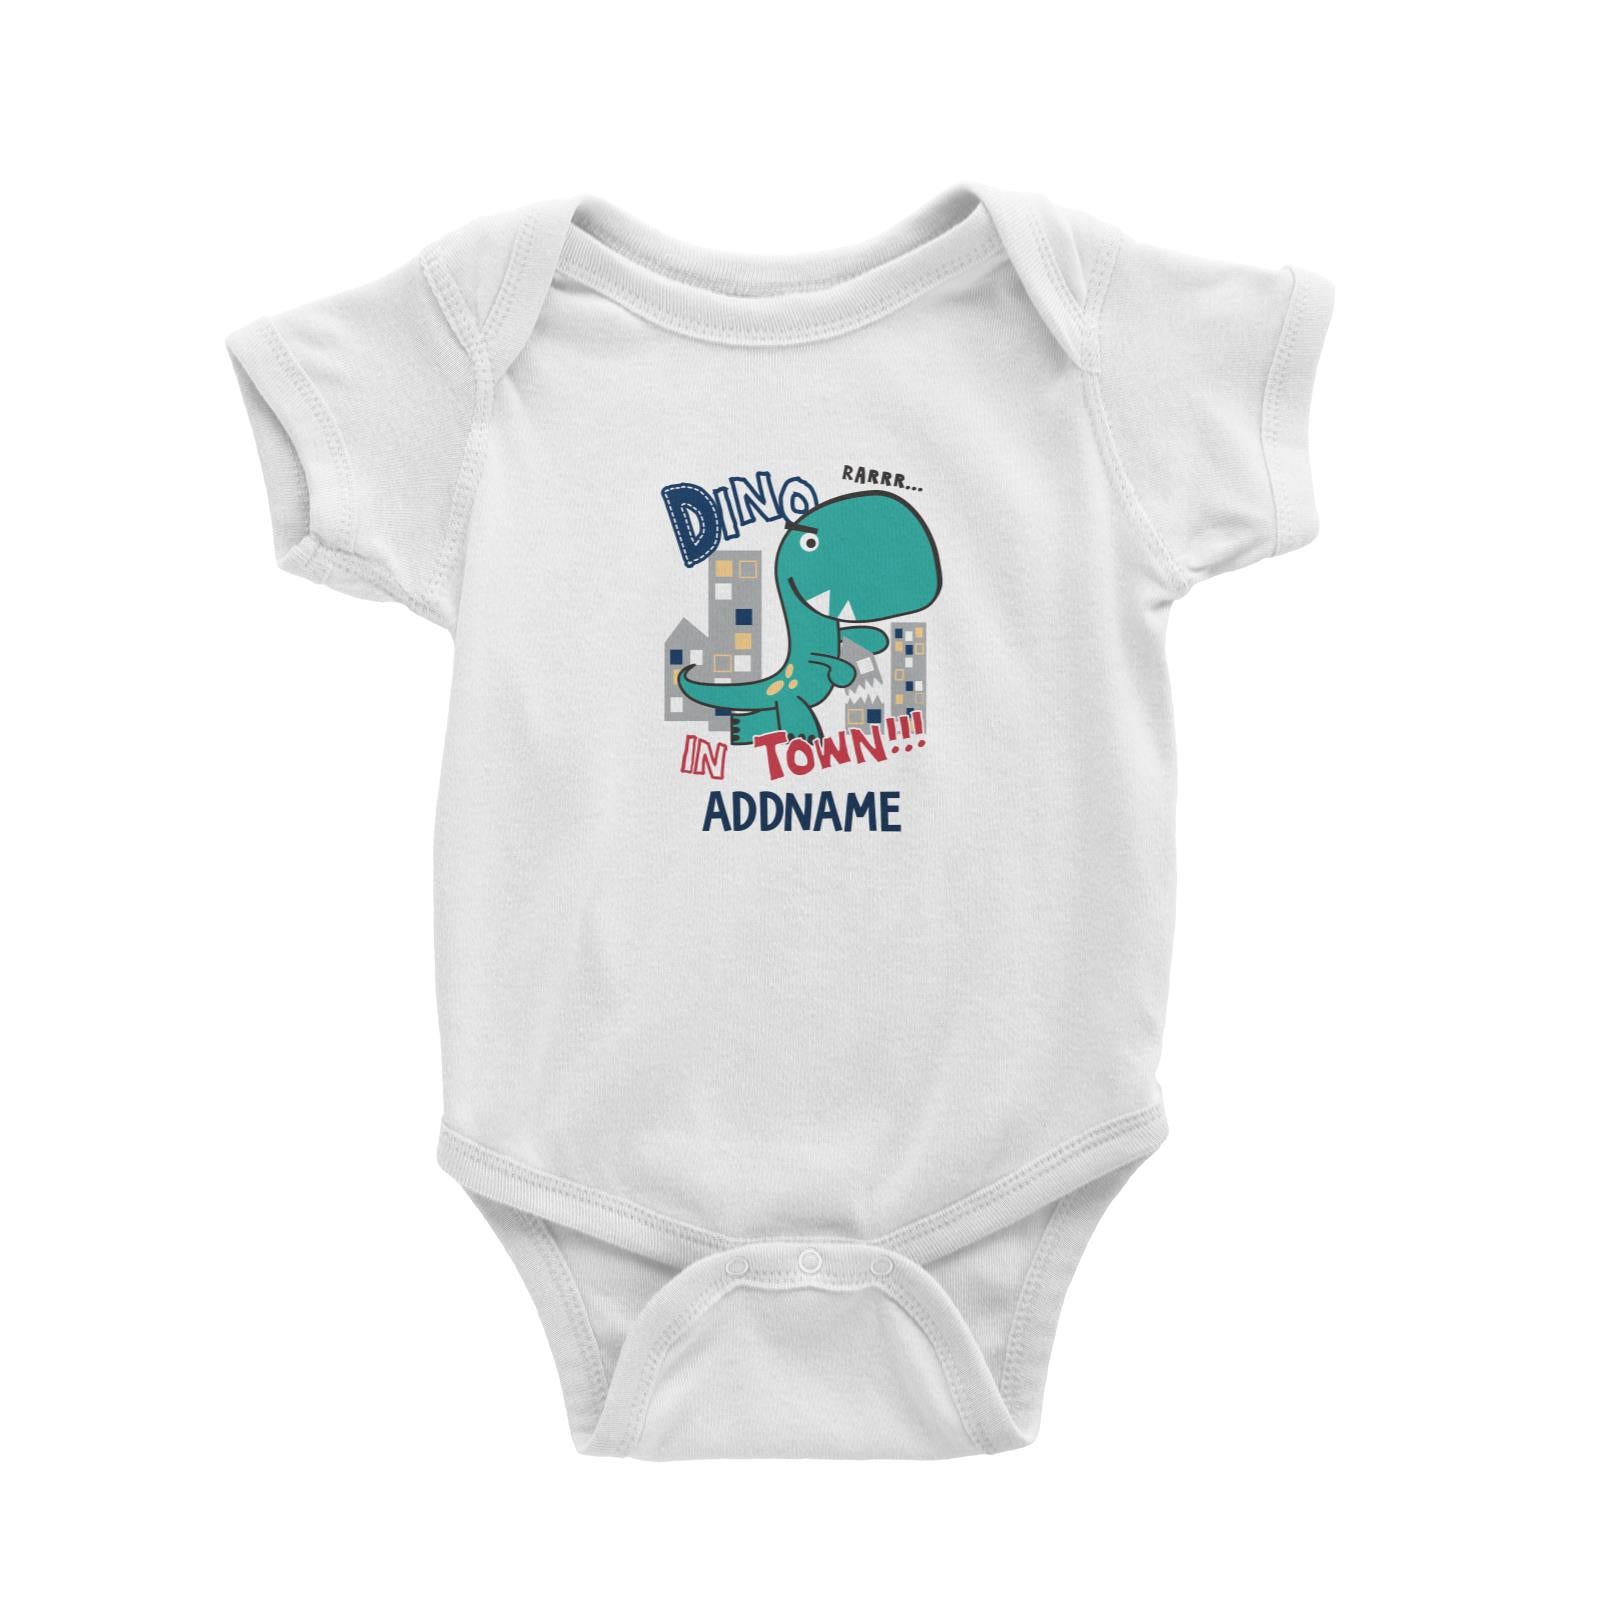 Cool Vibrant Series Dino In Town Addname Baby Romper [SALE]